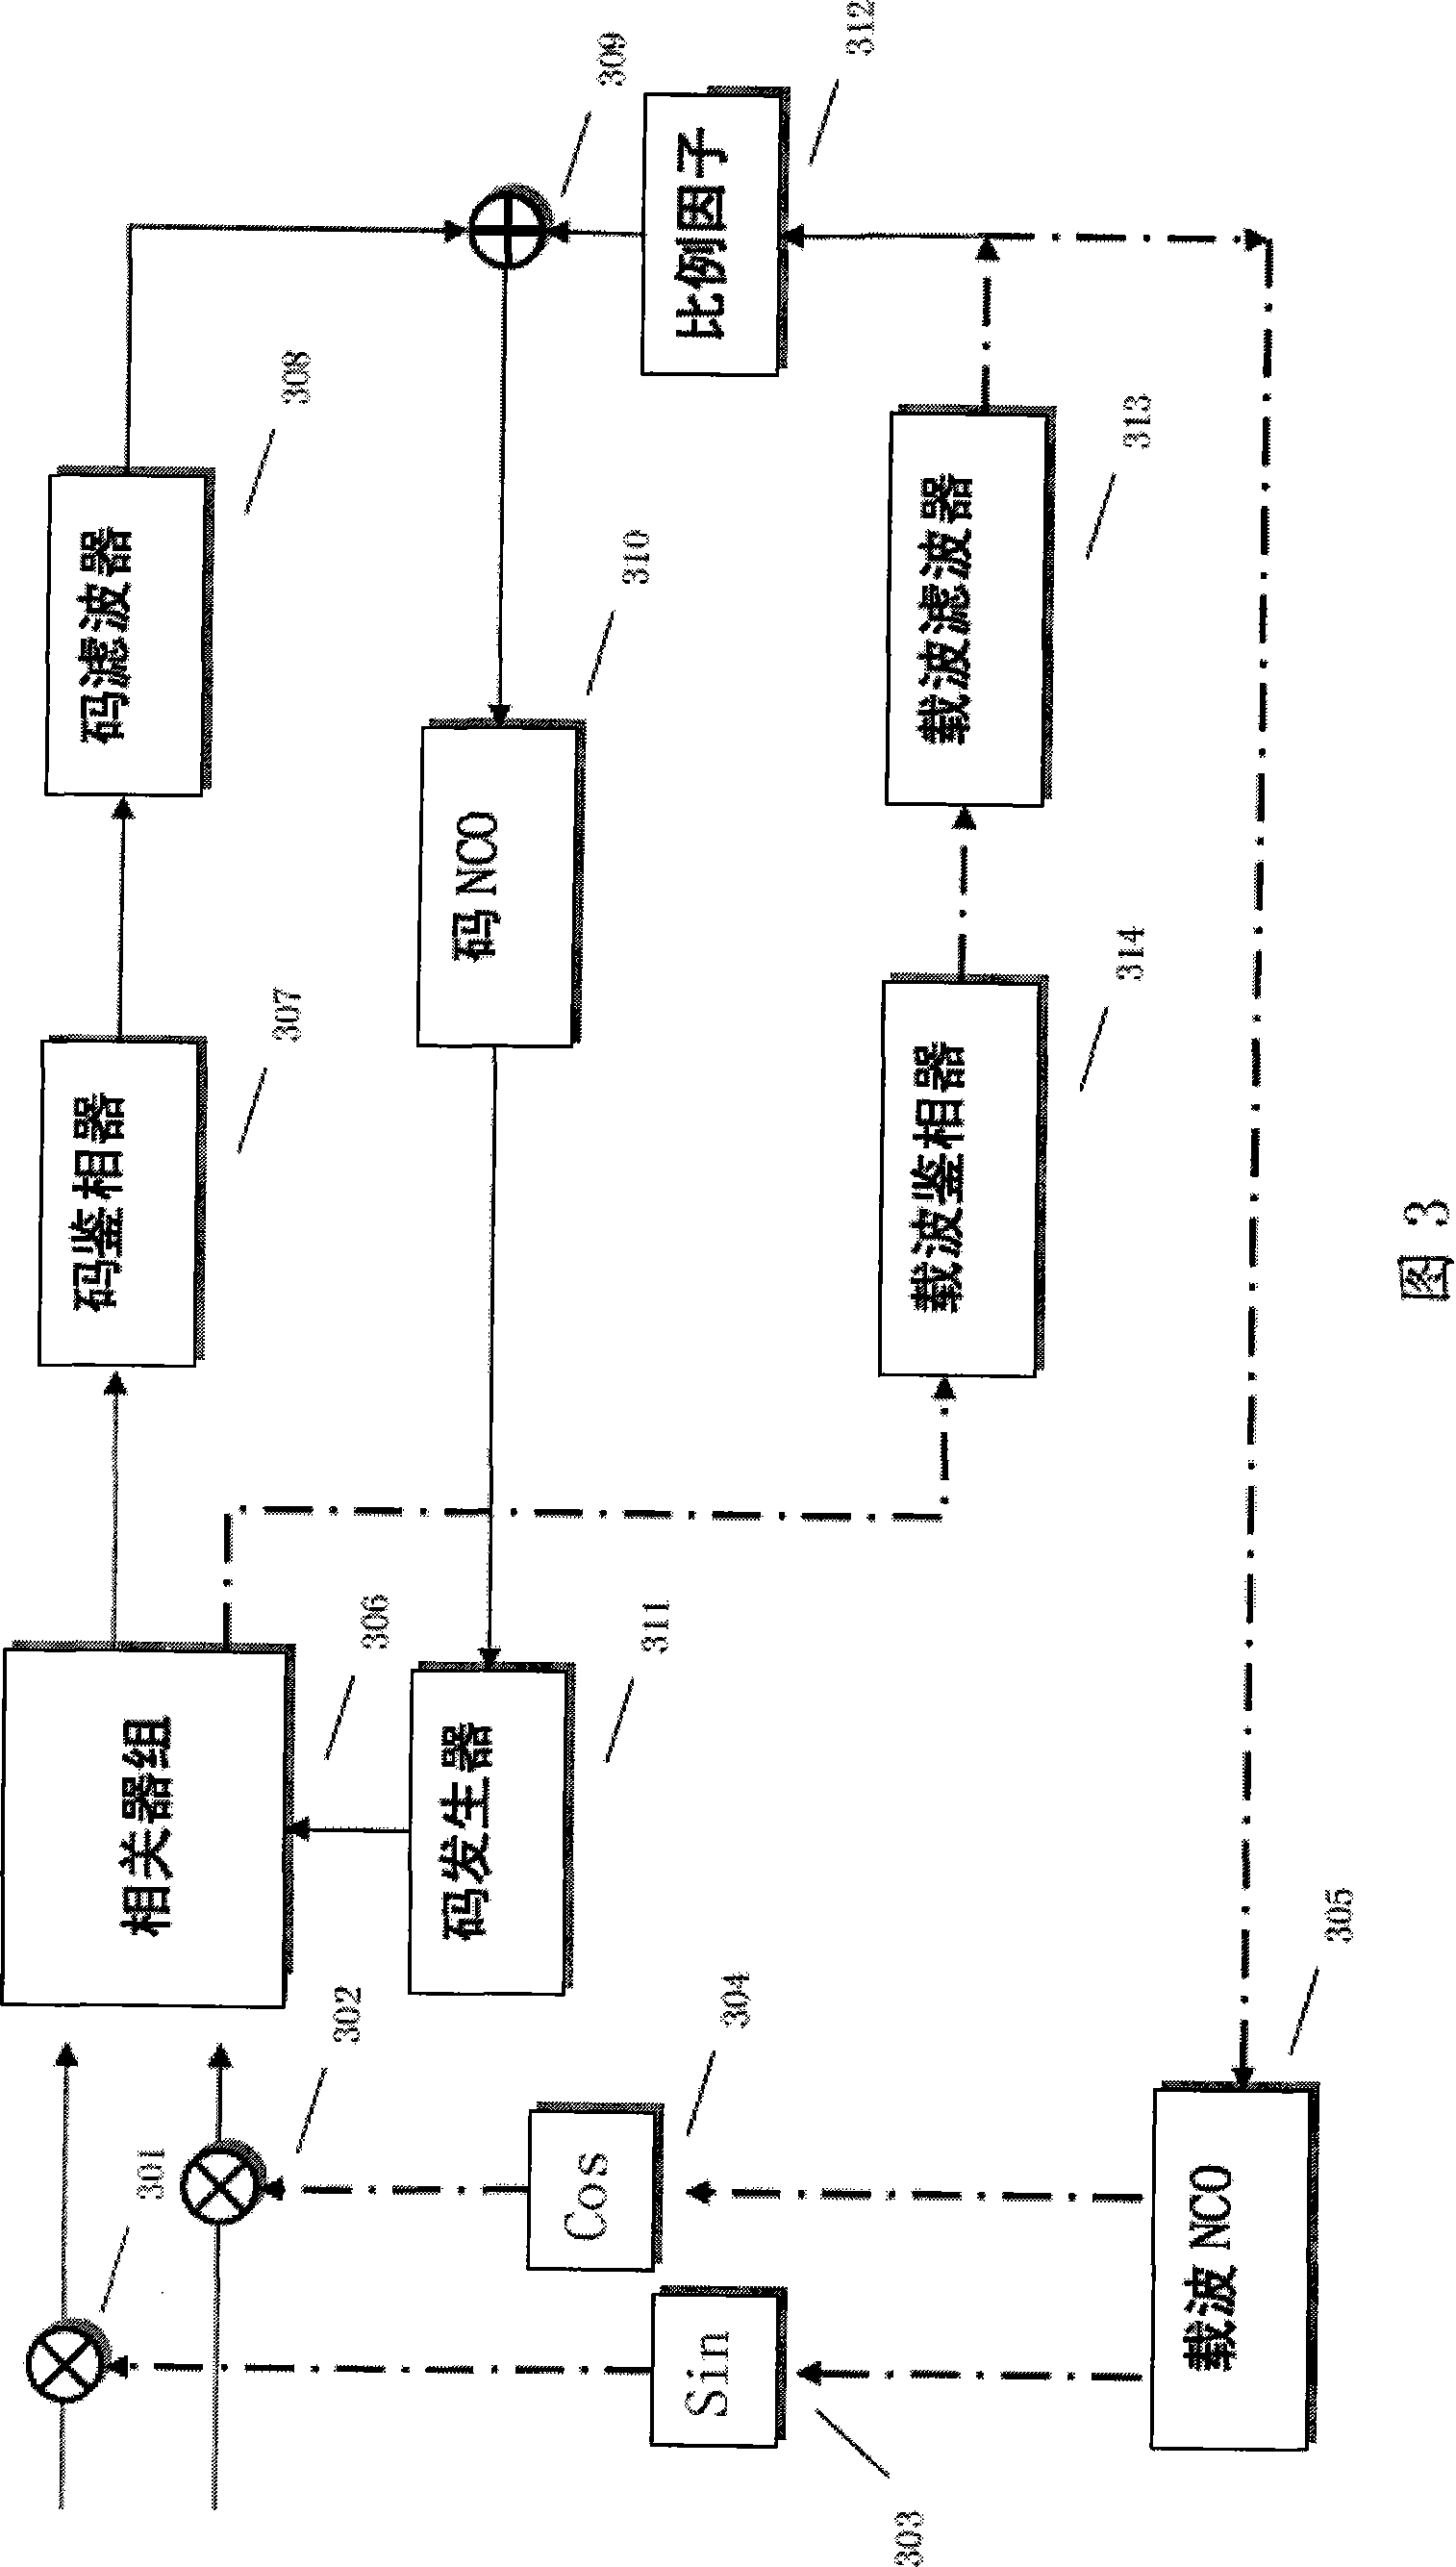 Method and system for tracking global positioning receiver